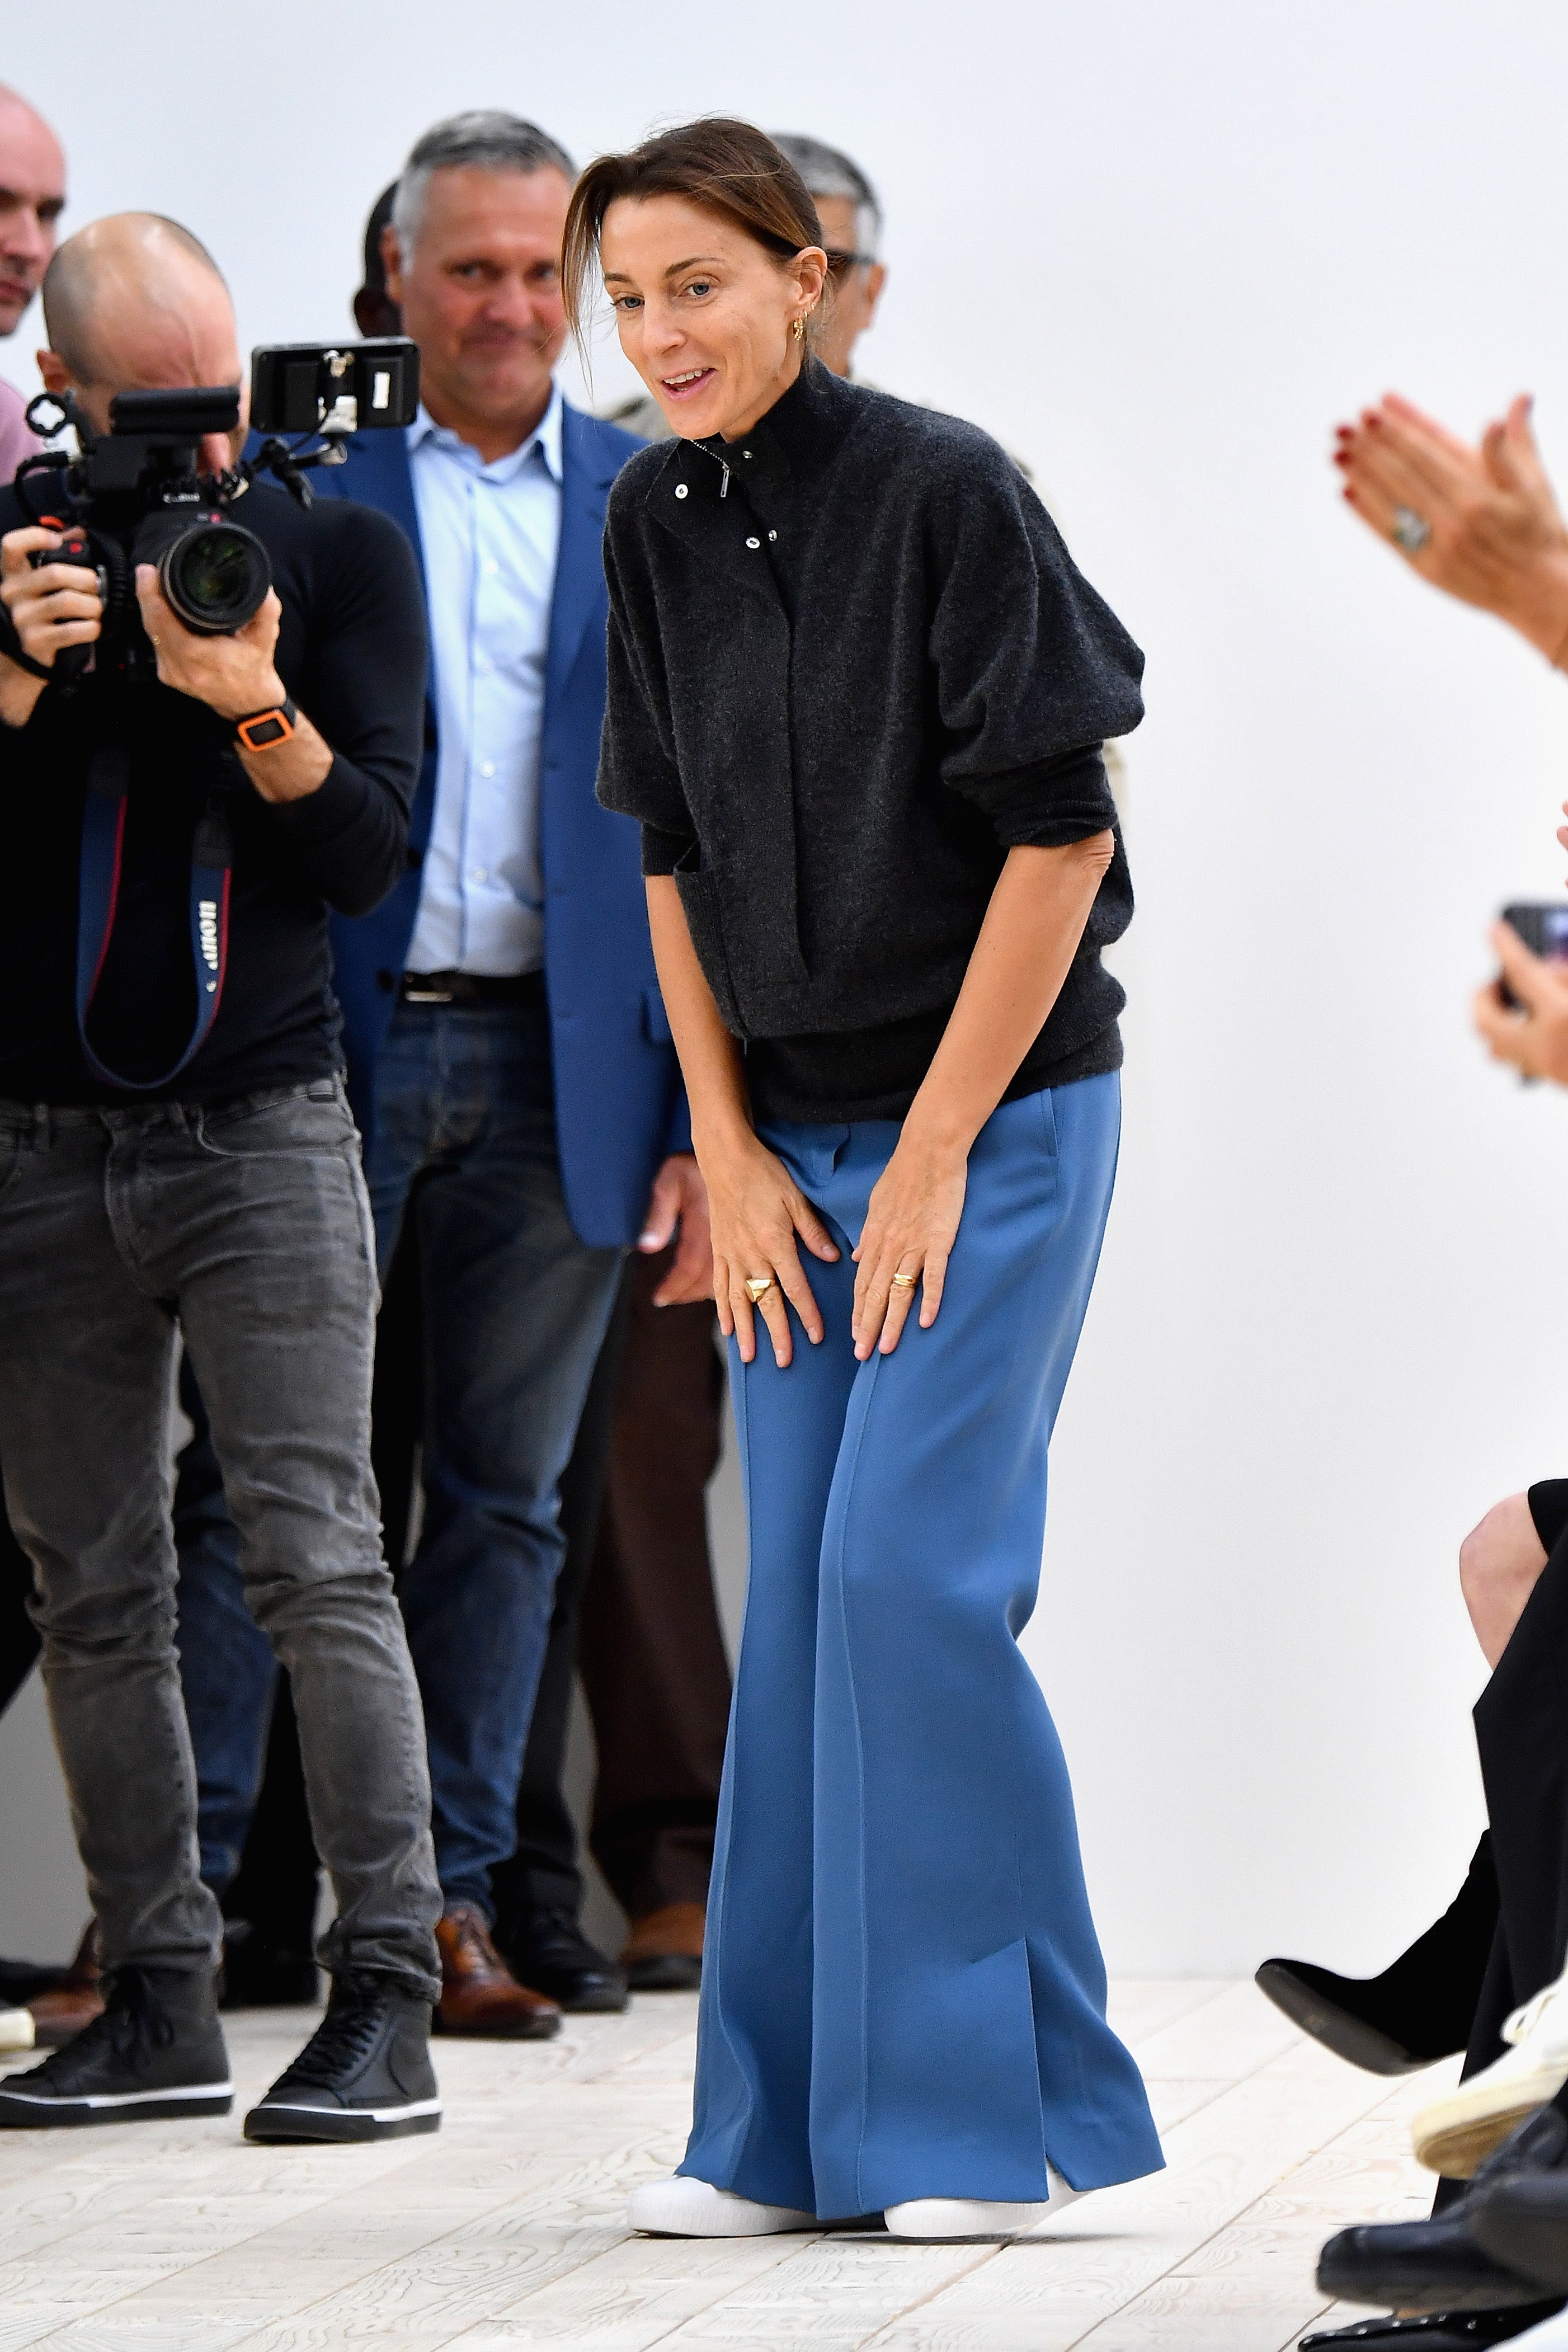 Former Celine creative director Phoebe Philo to launch new brand